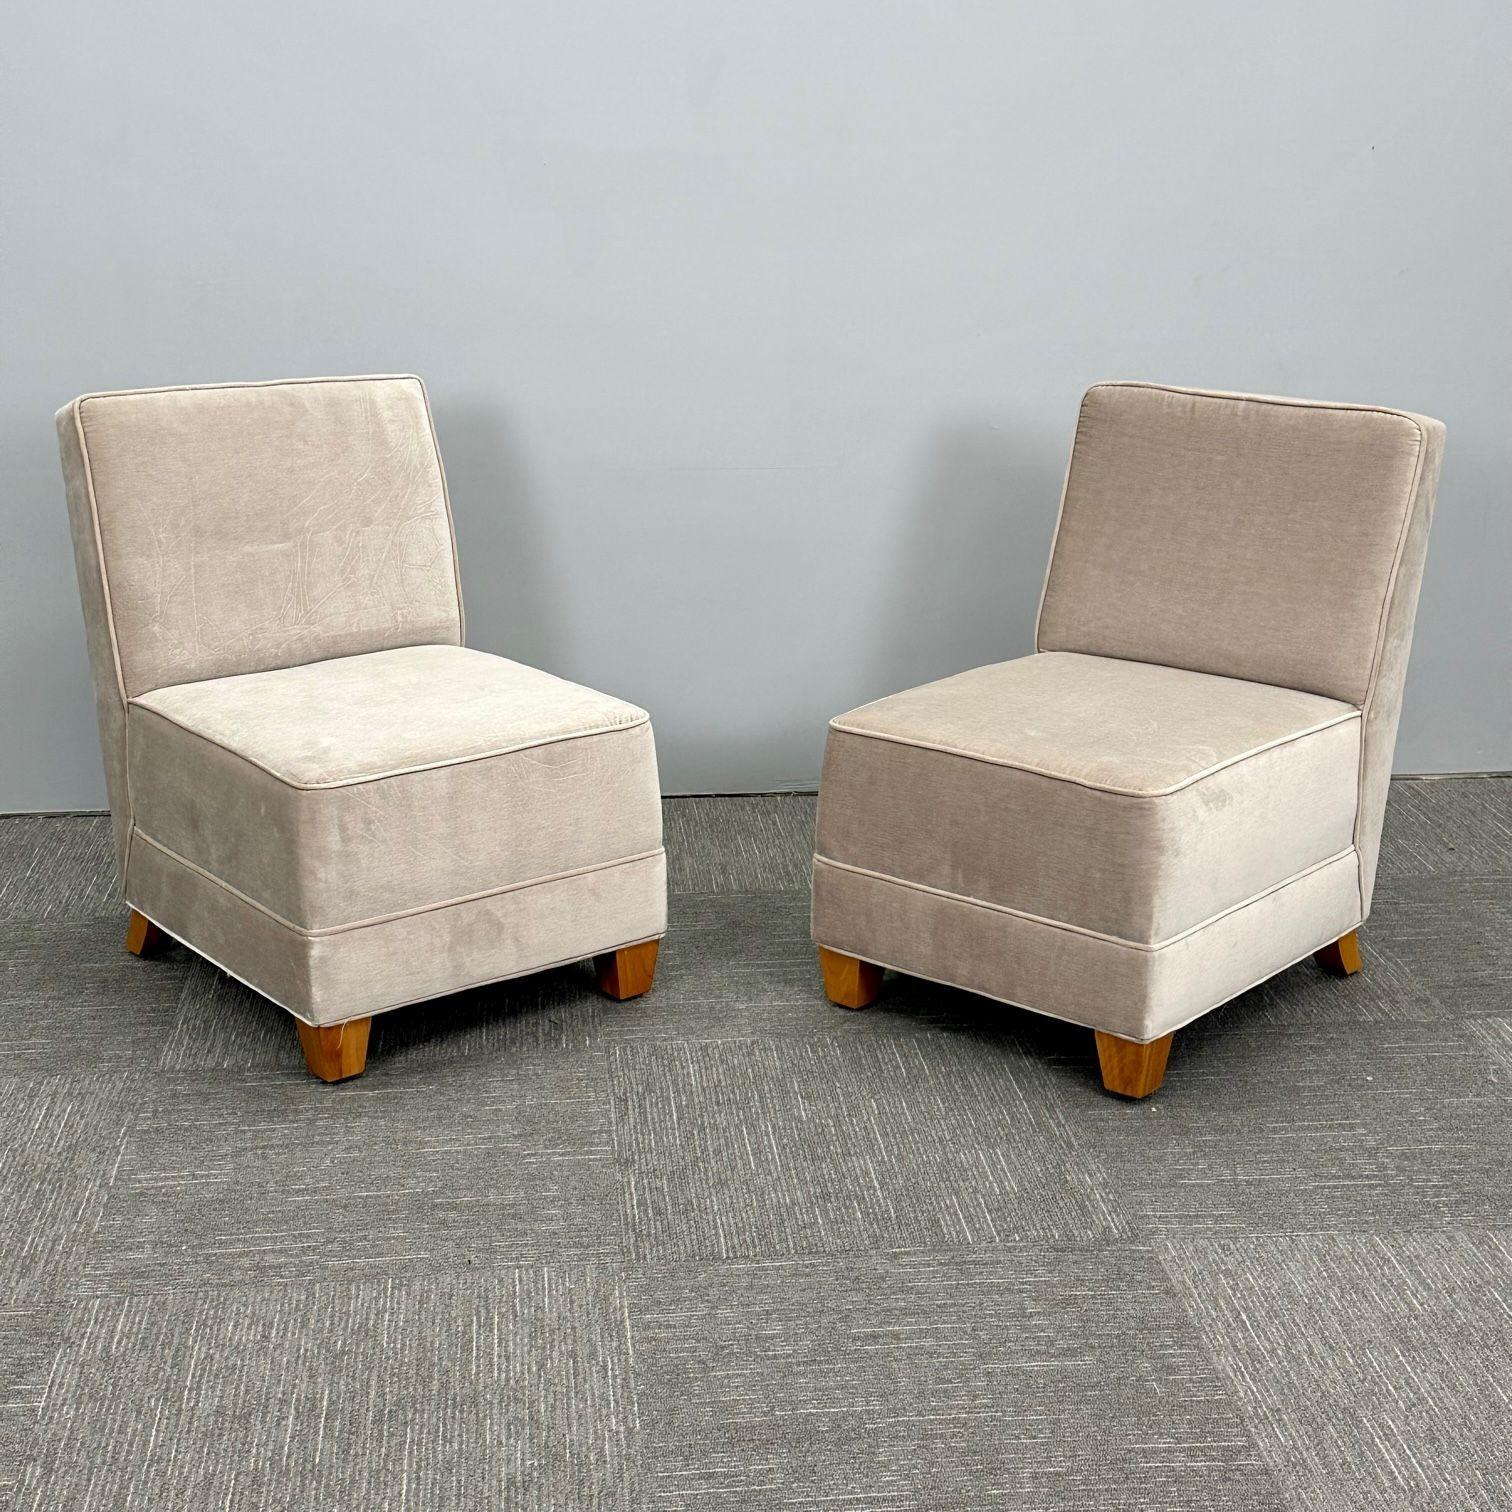 European Pair Mid-Century Modern Jean-Michel Frank Style Lounge / Slipper Chairs, Mohair For Sale